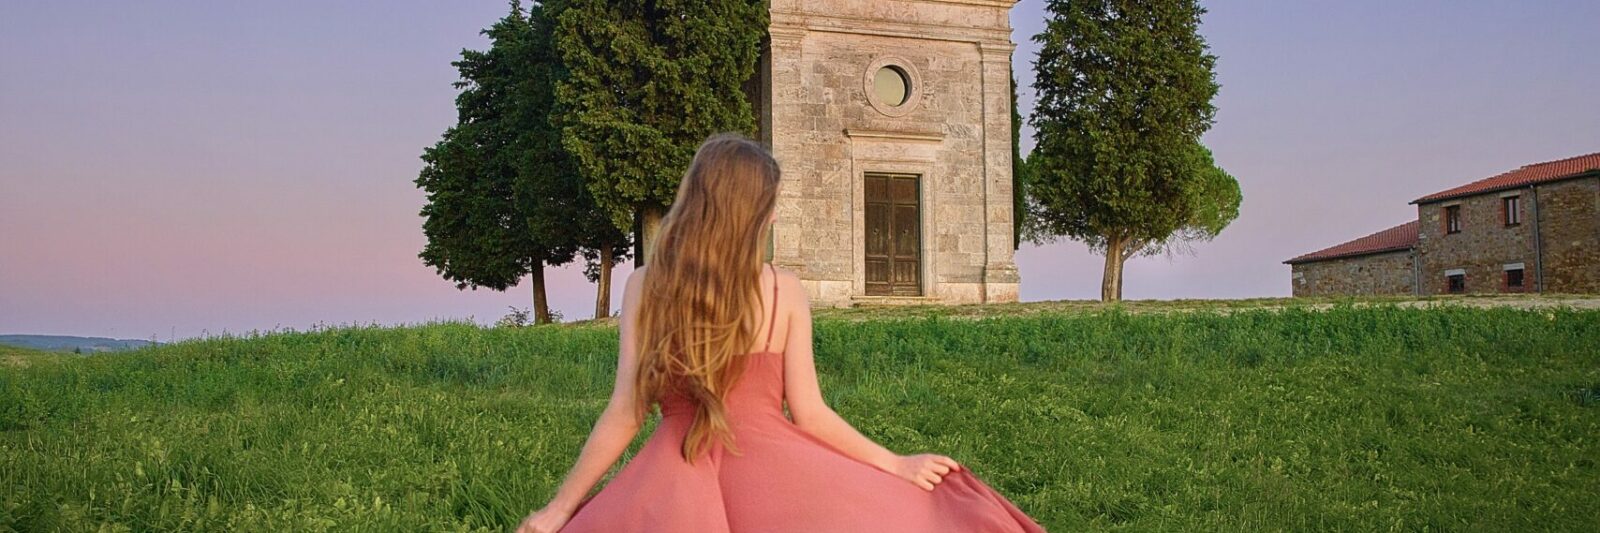 woman standing in Tuscany in a pink dress under the moonlight at a chapel